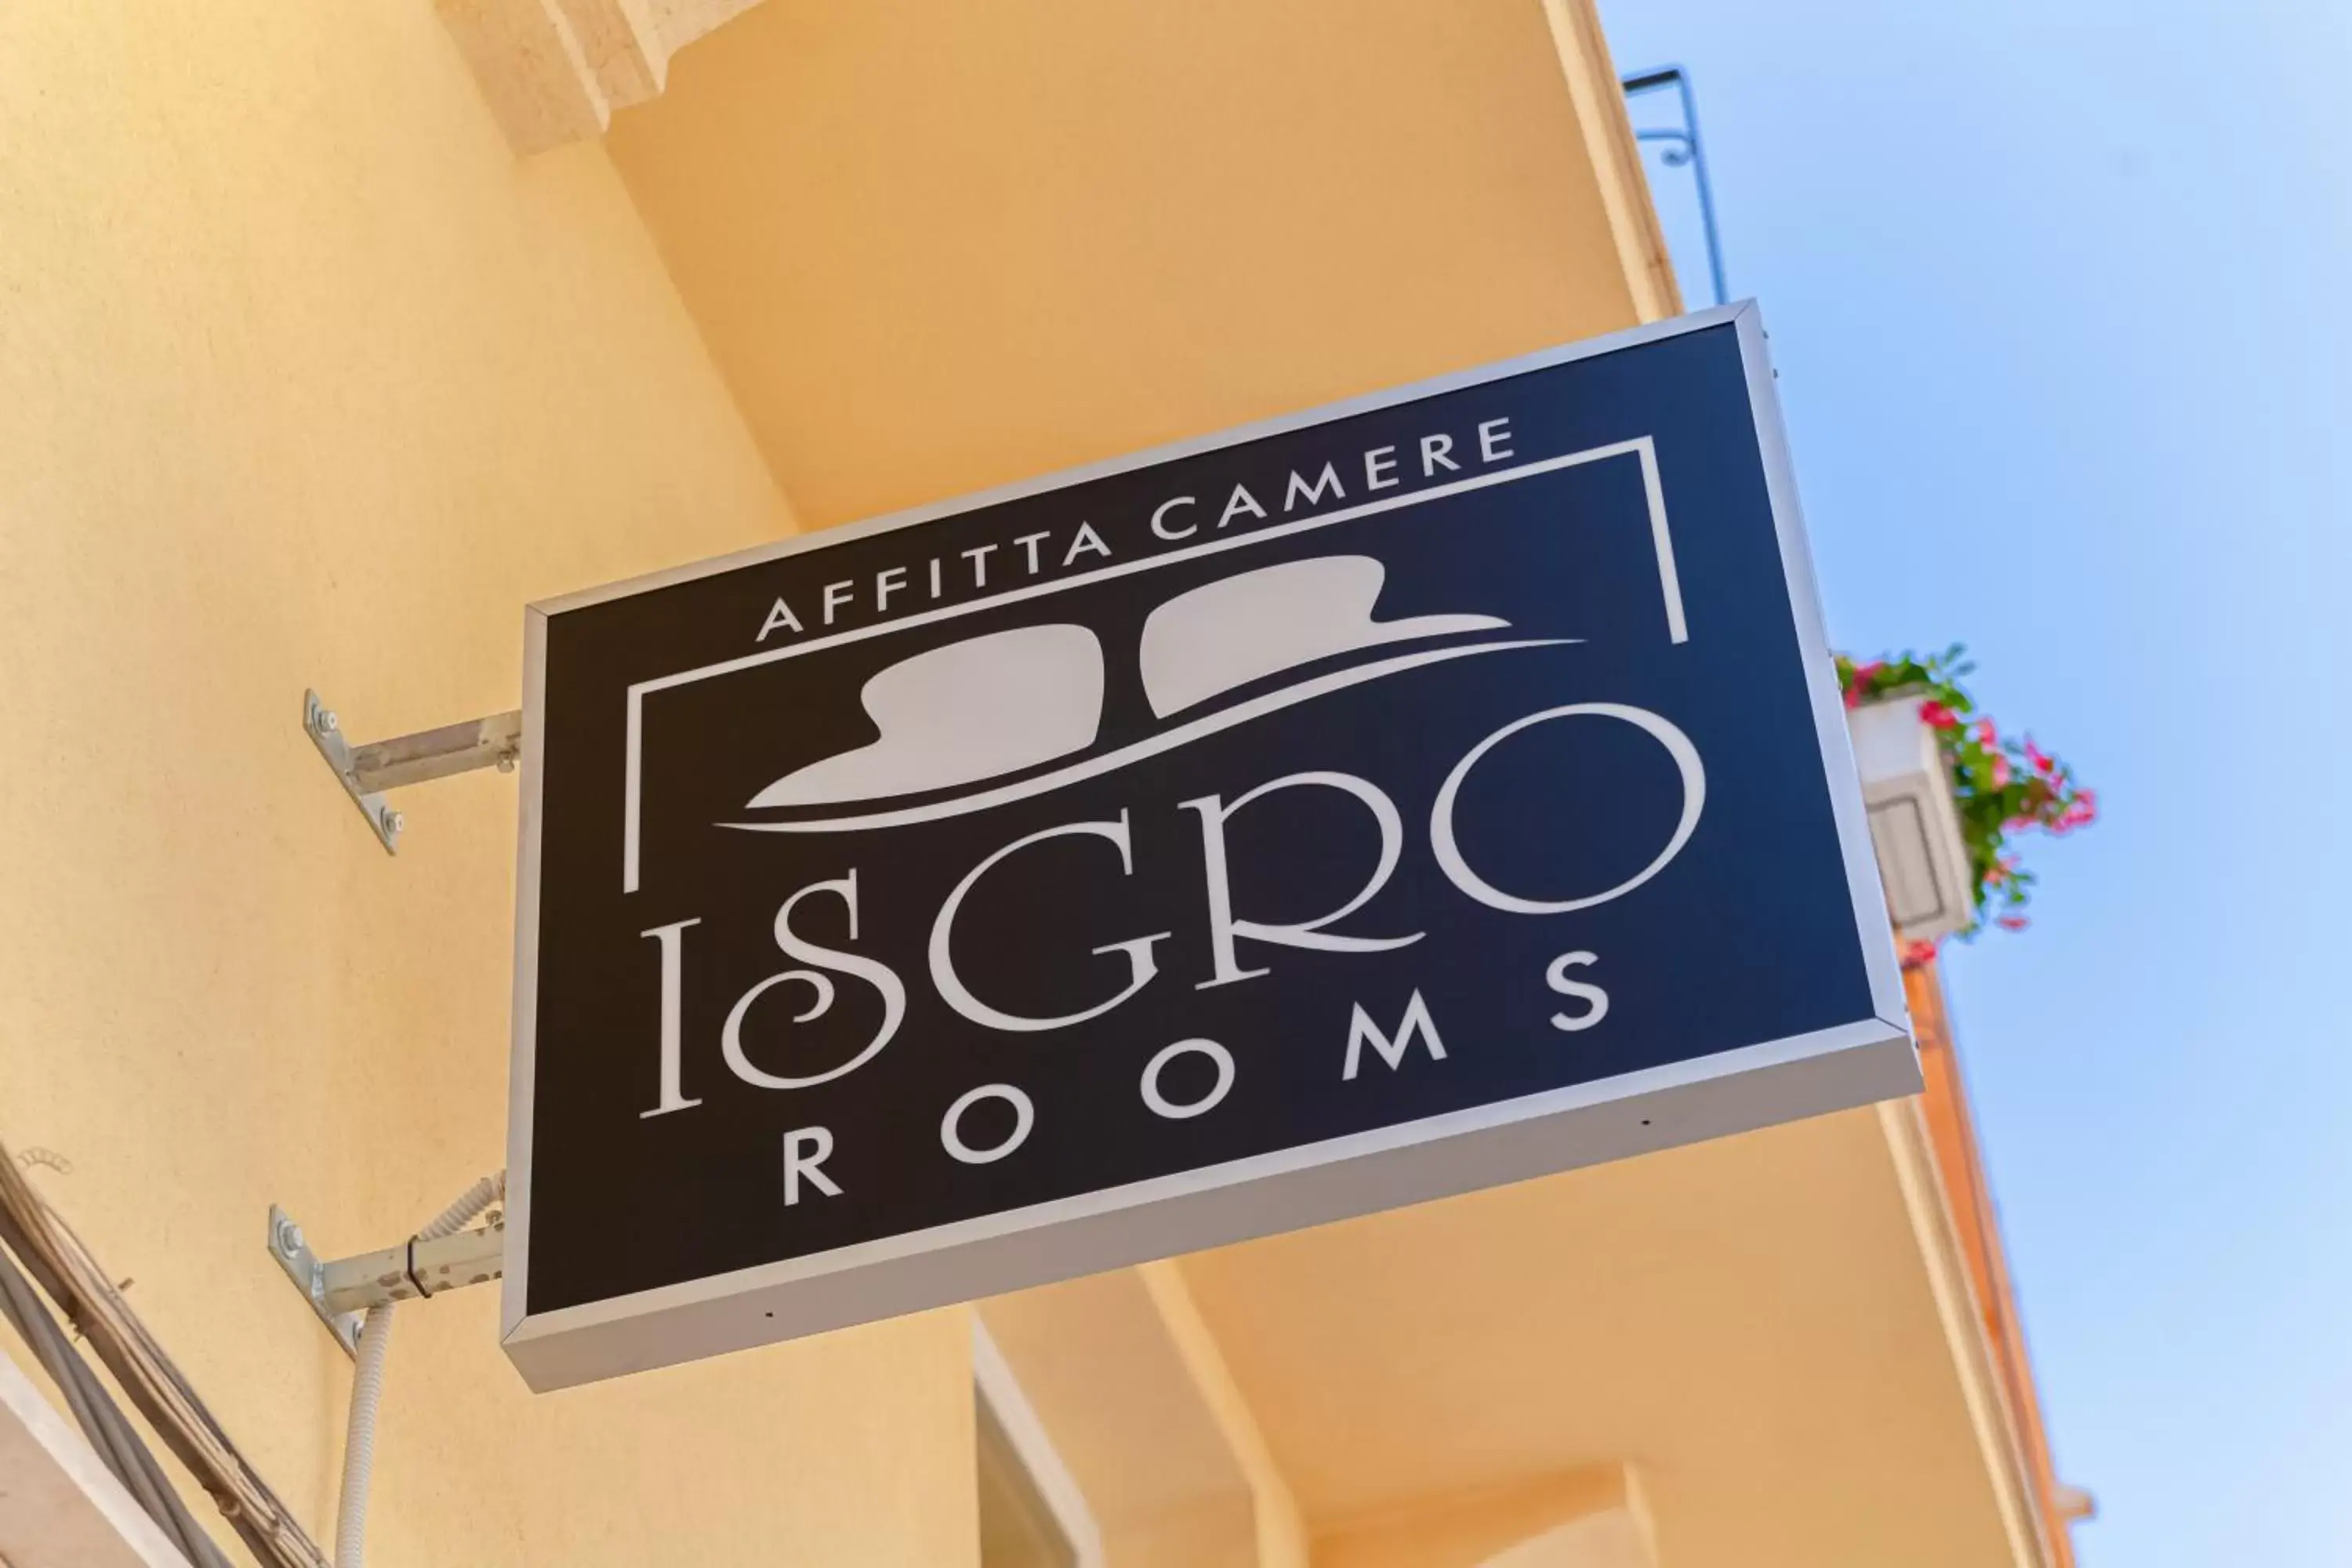 Property logo or sign in Isgrò Rooms